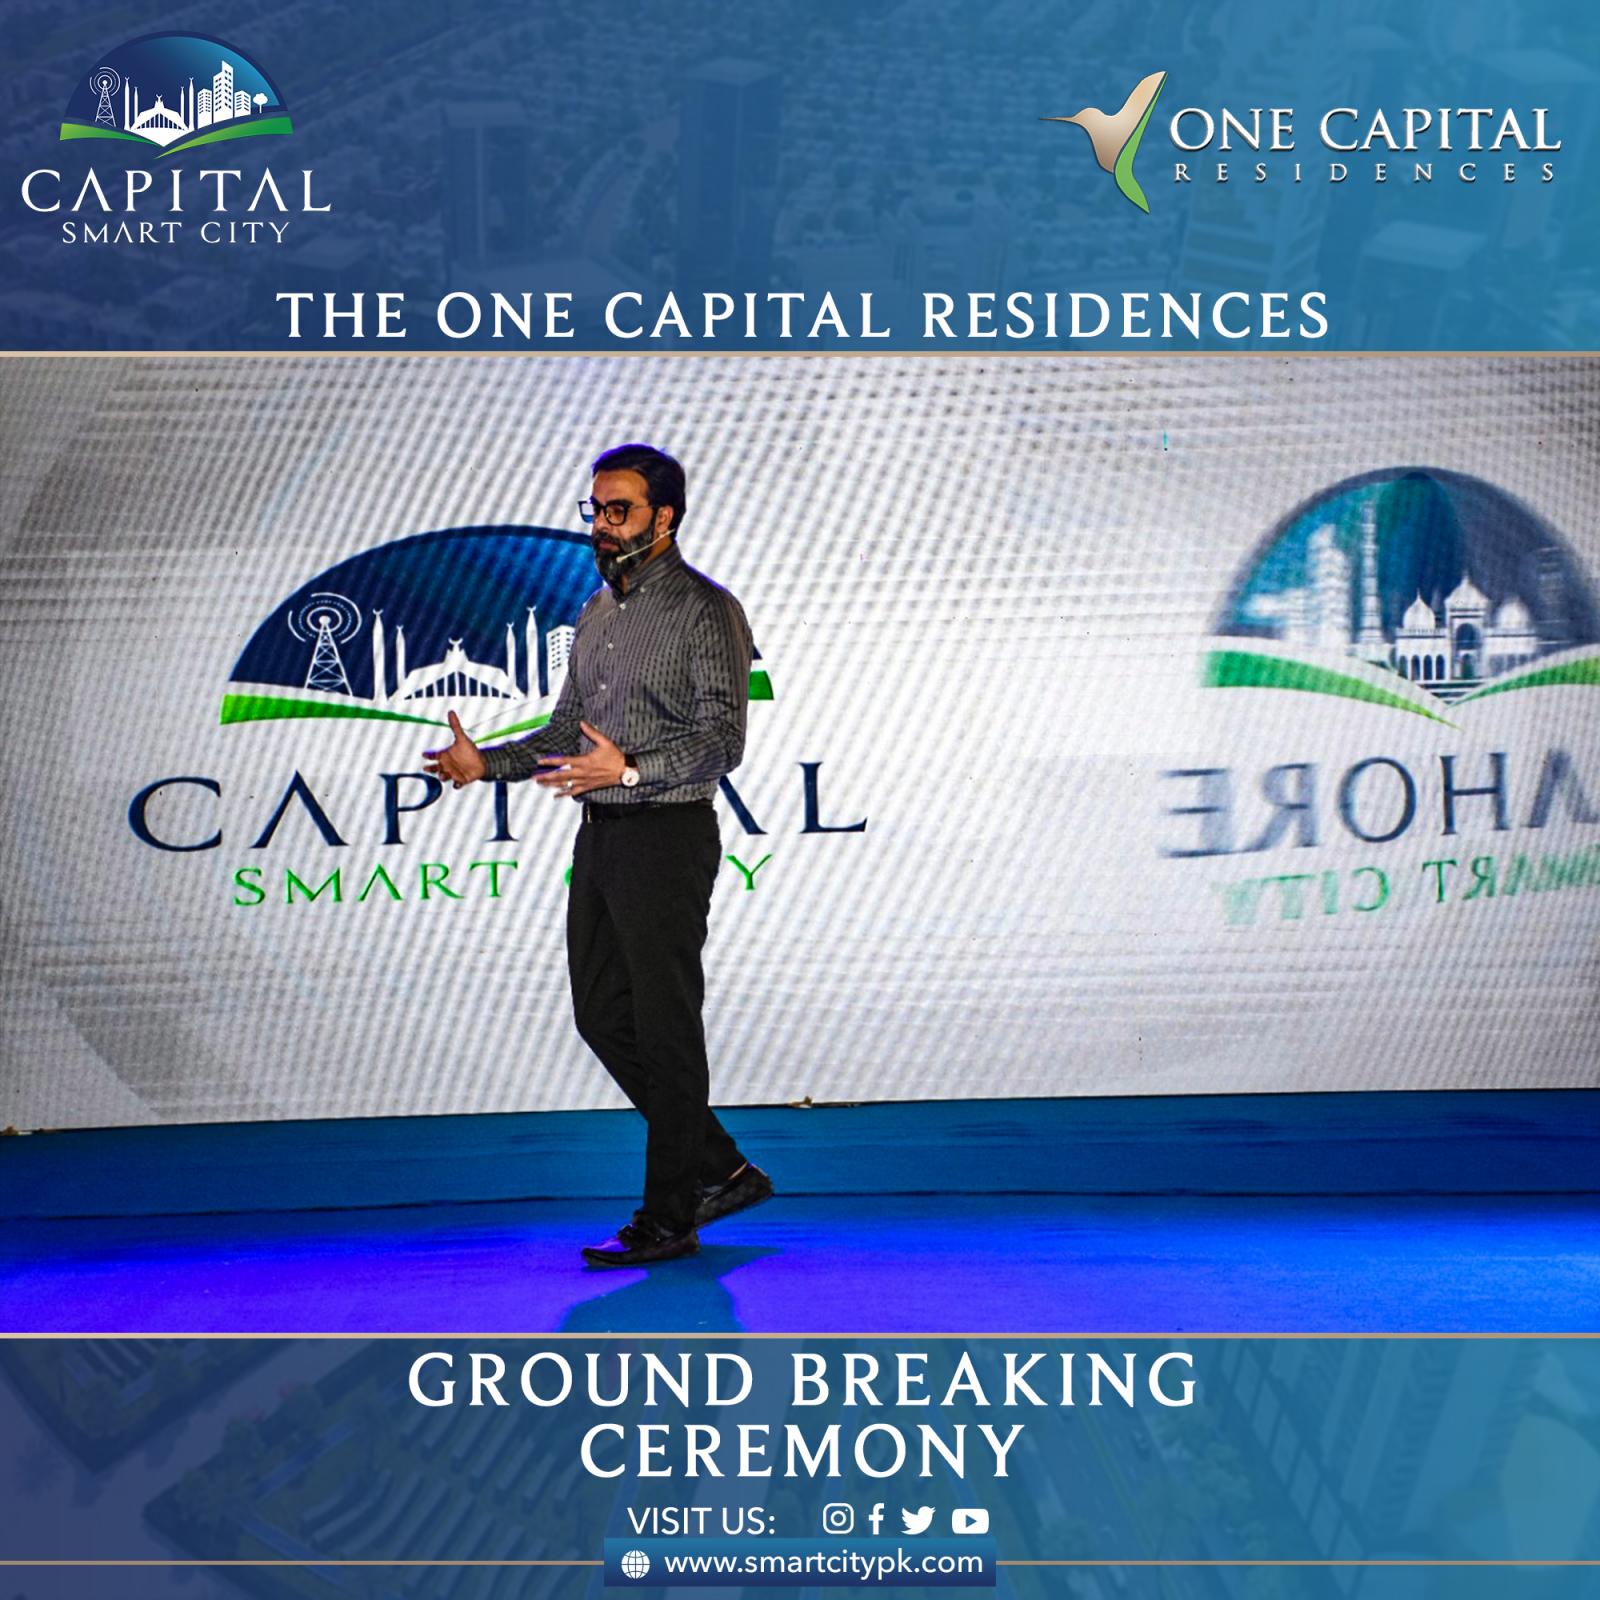 The One Capital Residences ground breaking Ceremony